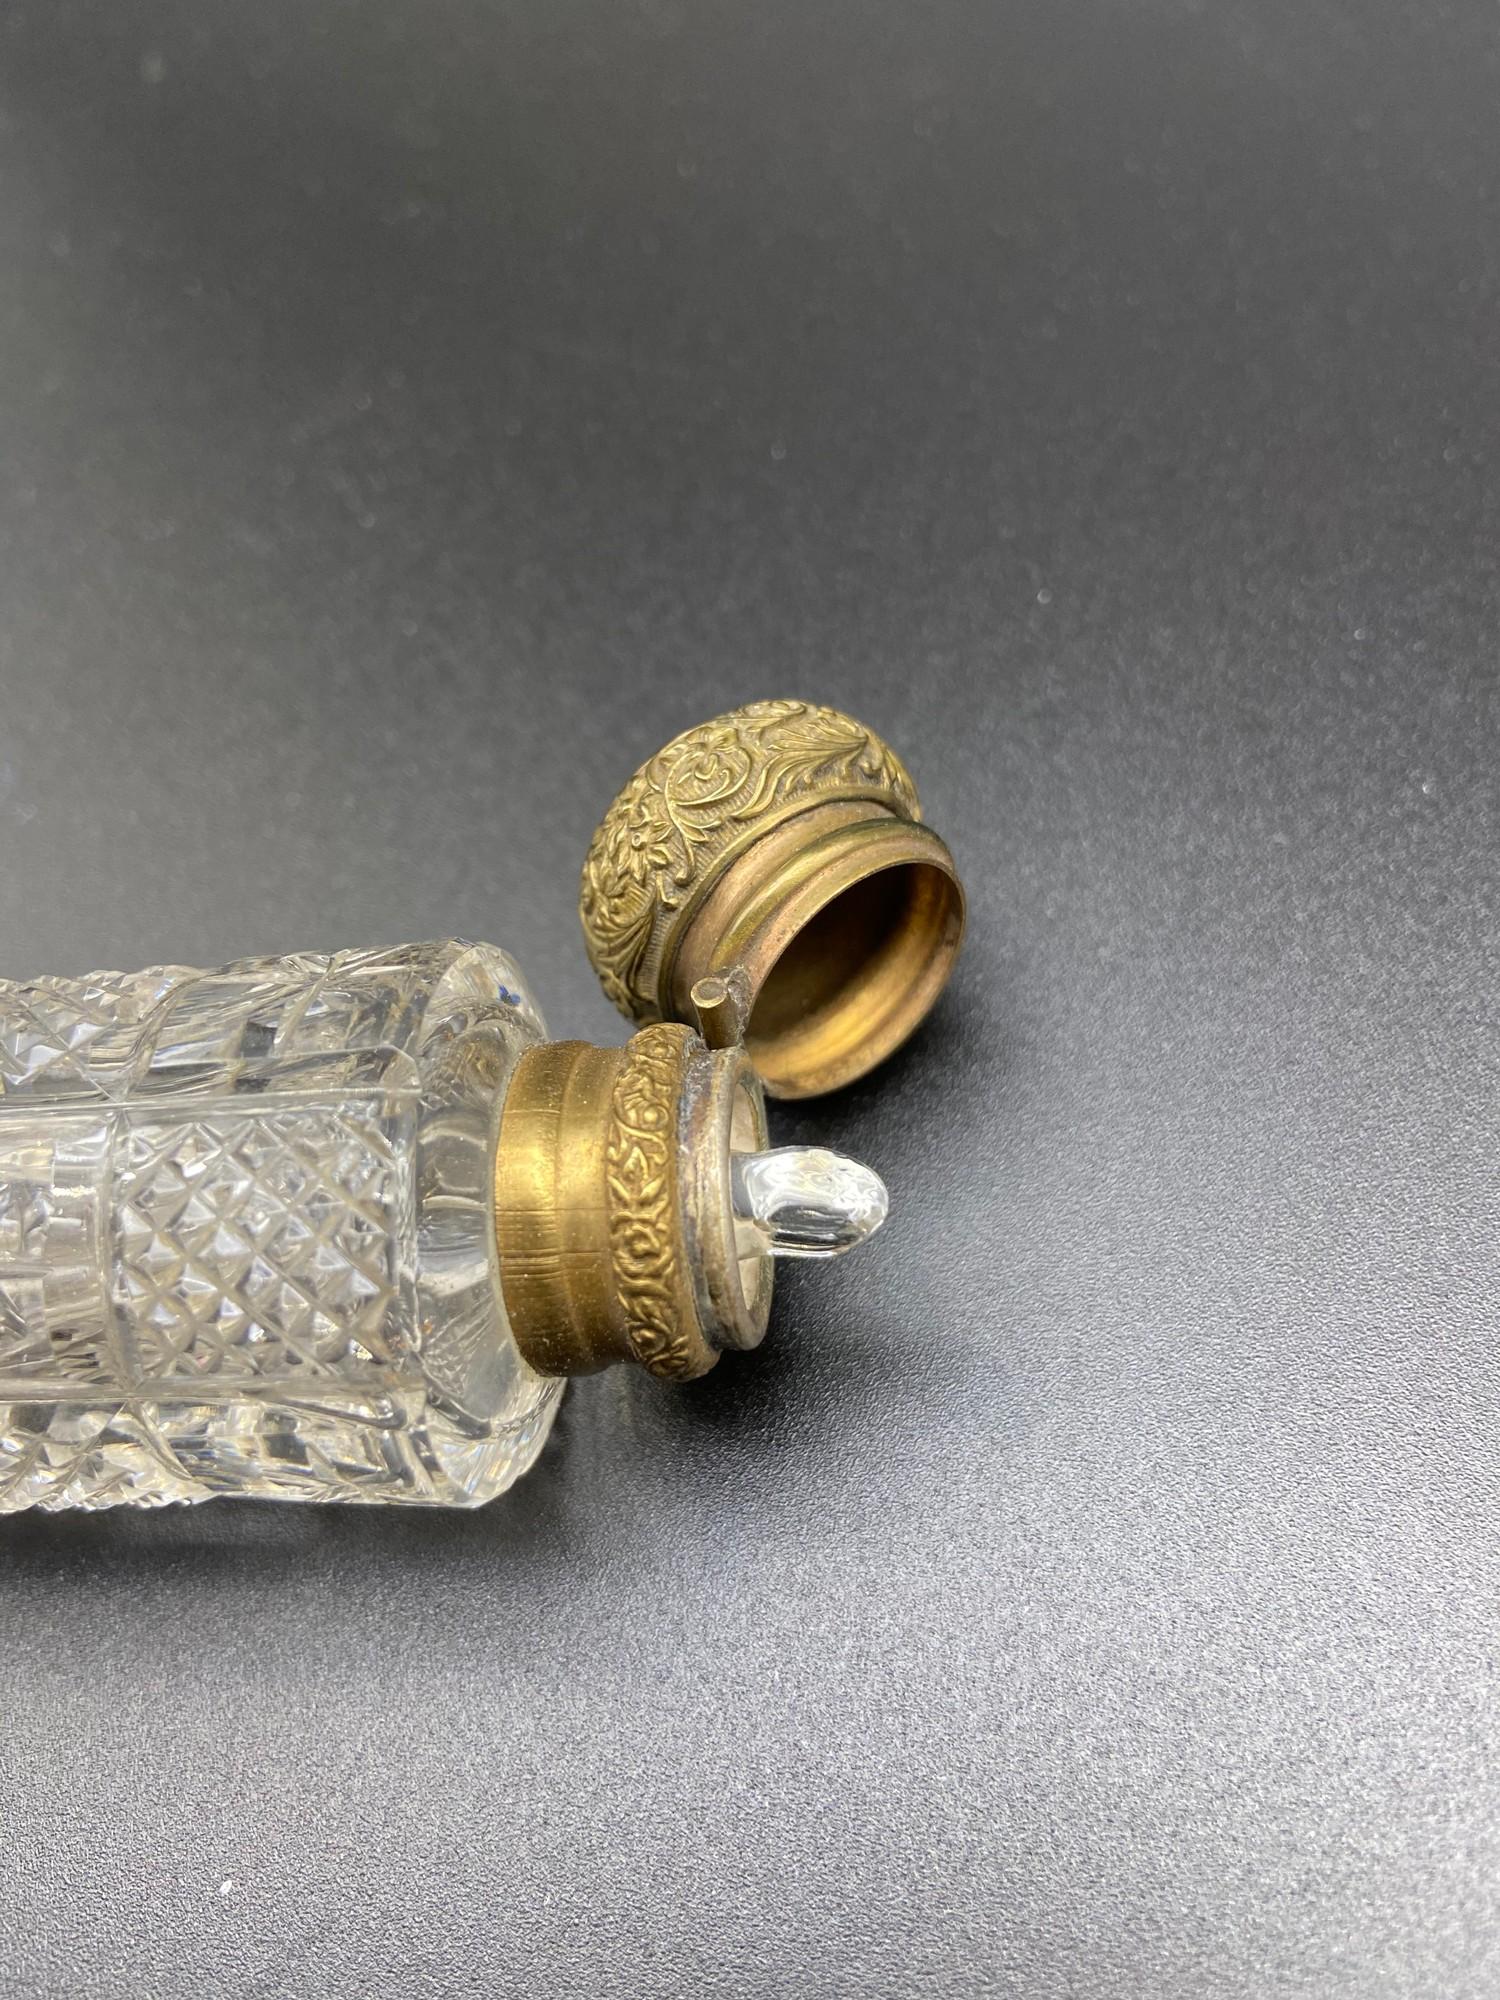 Antique double ended perfume bottle. Designed with two gilt metal tops and cut glass body. Comes - Image 8 of 8